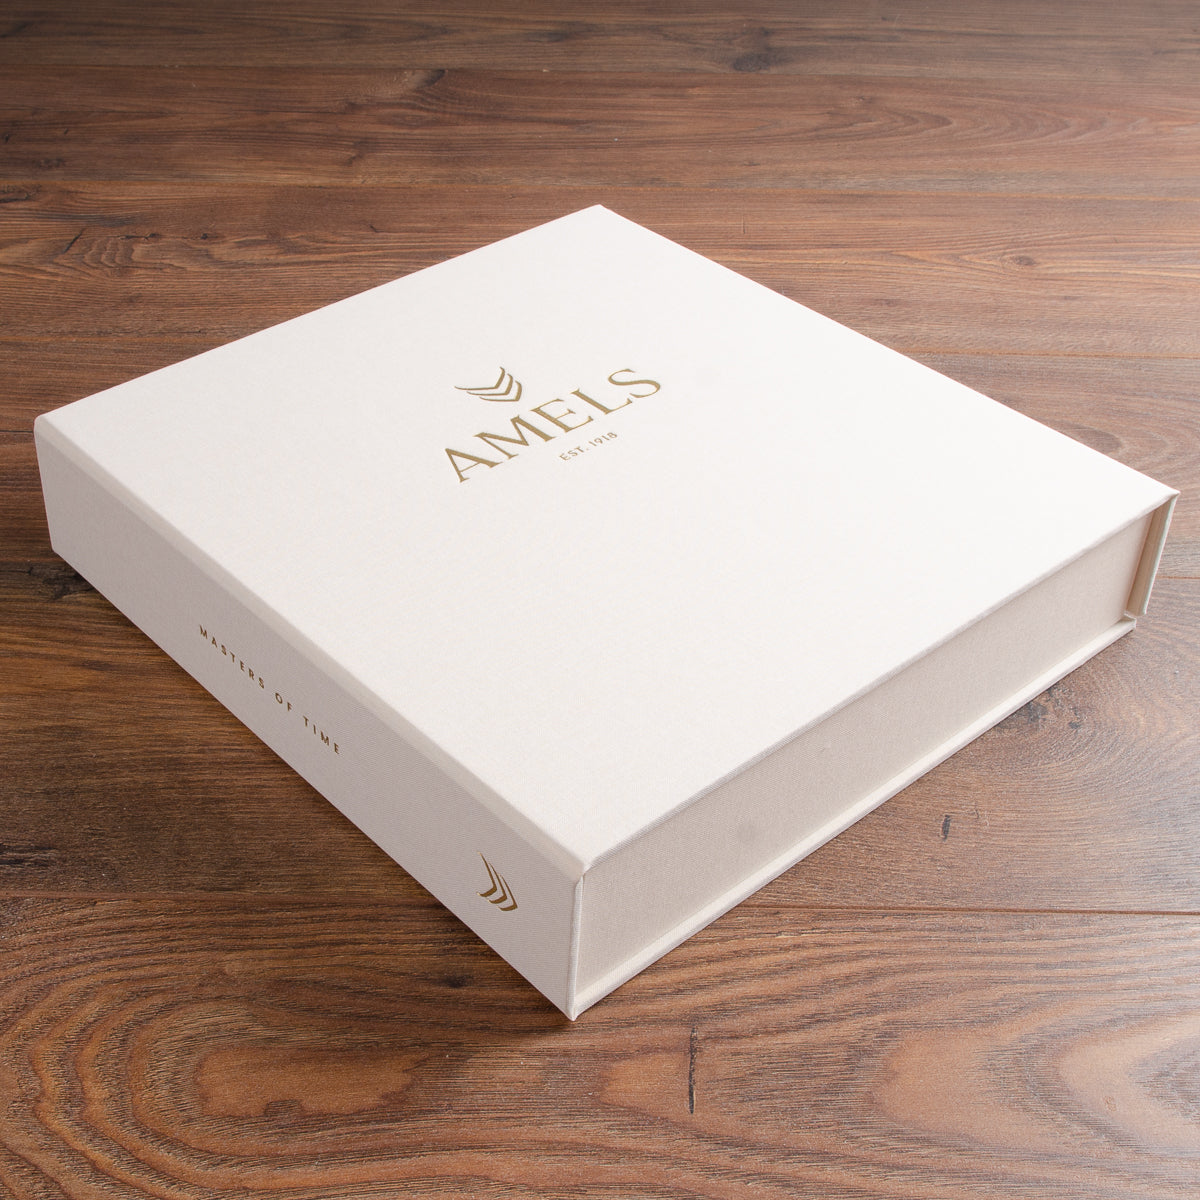 Luxury clamshell presentation box in cream fabric material with gold foil embossing on the cover and spine 